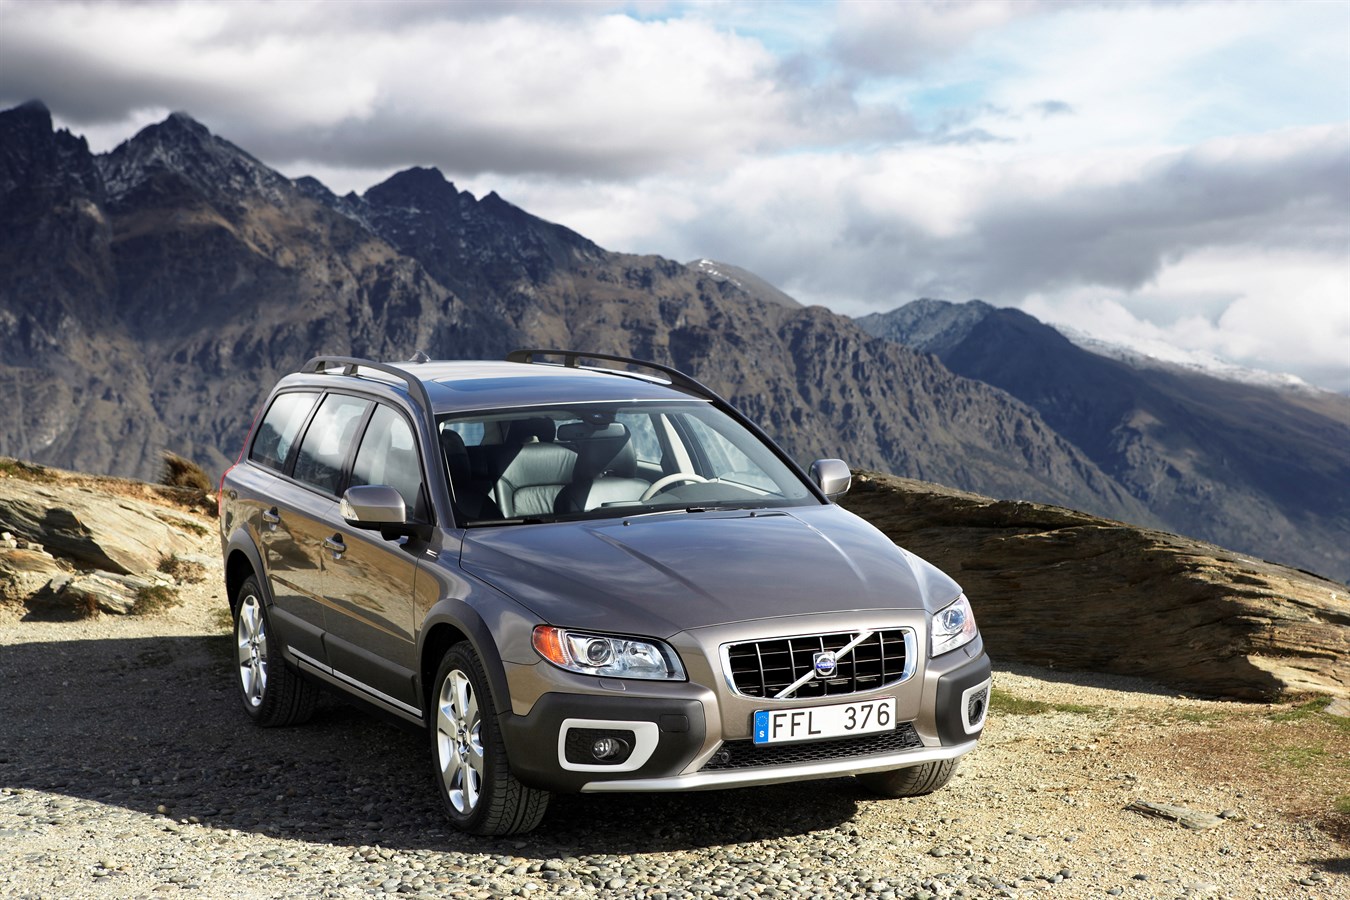 The all-new Volvo XC70